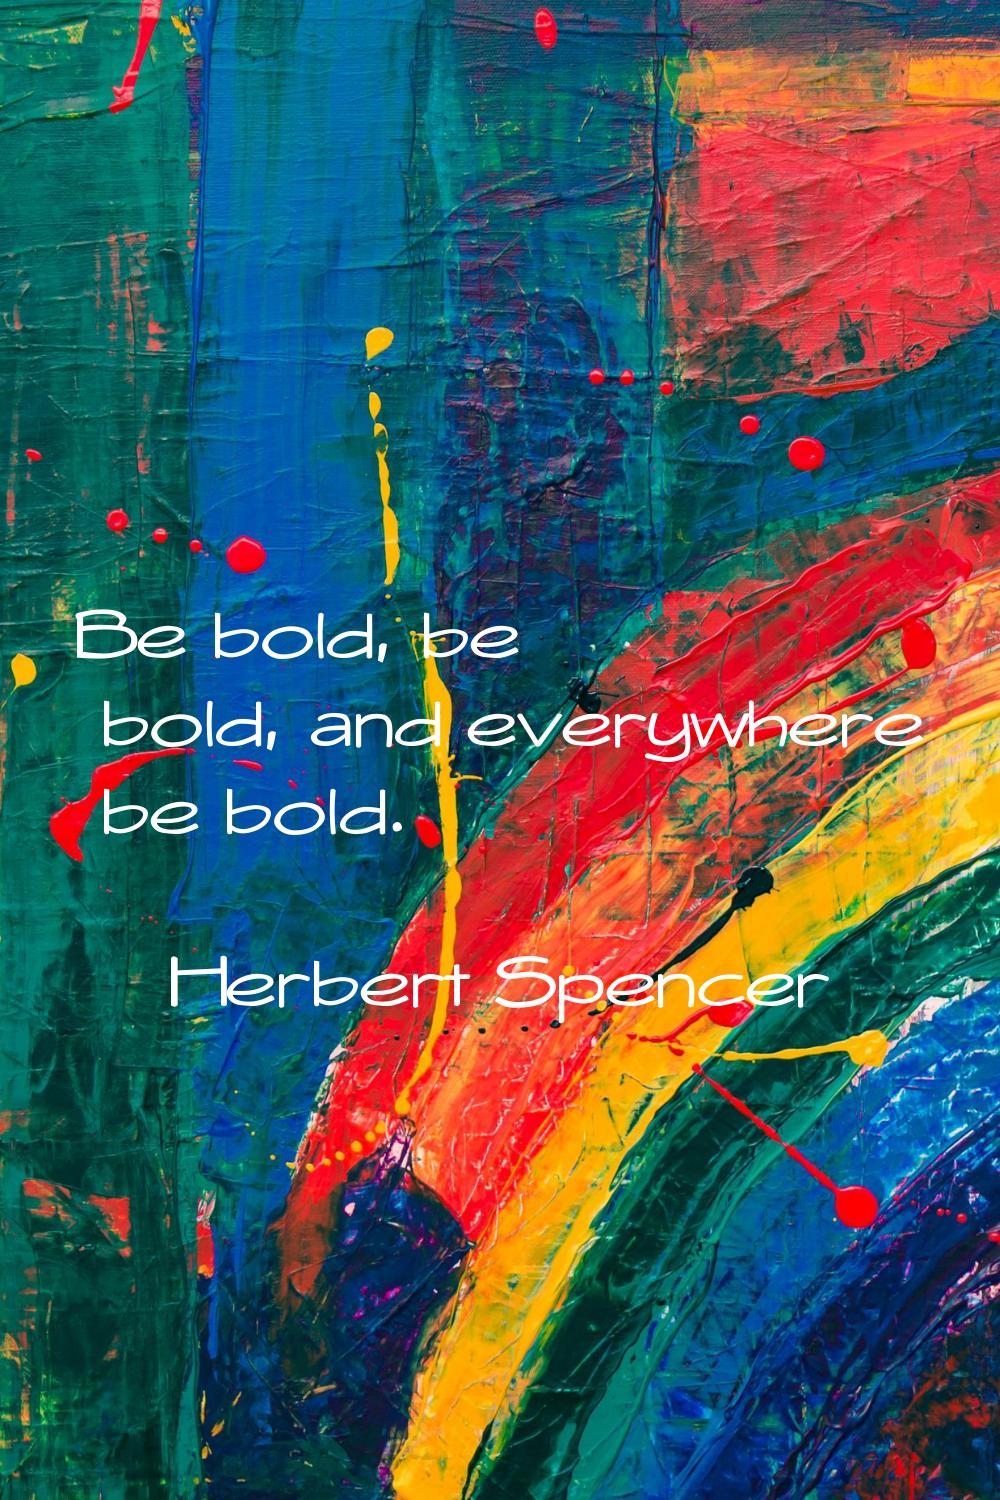 Be bold, be bold, and everywhere be bold.